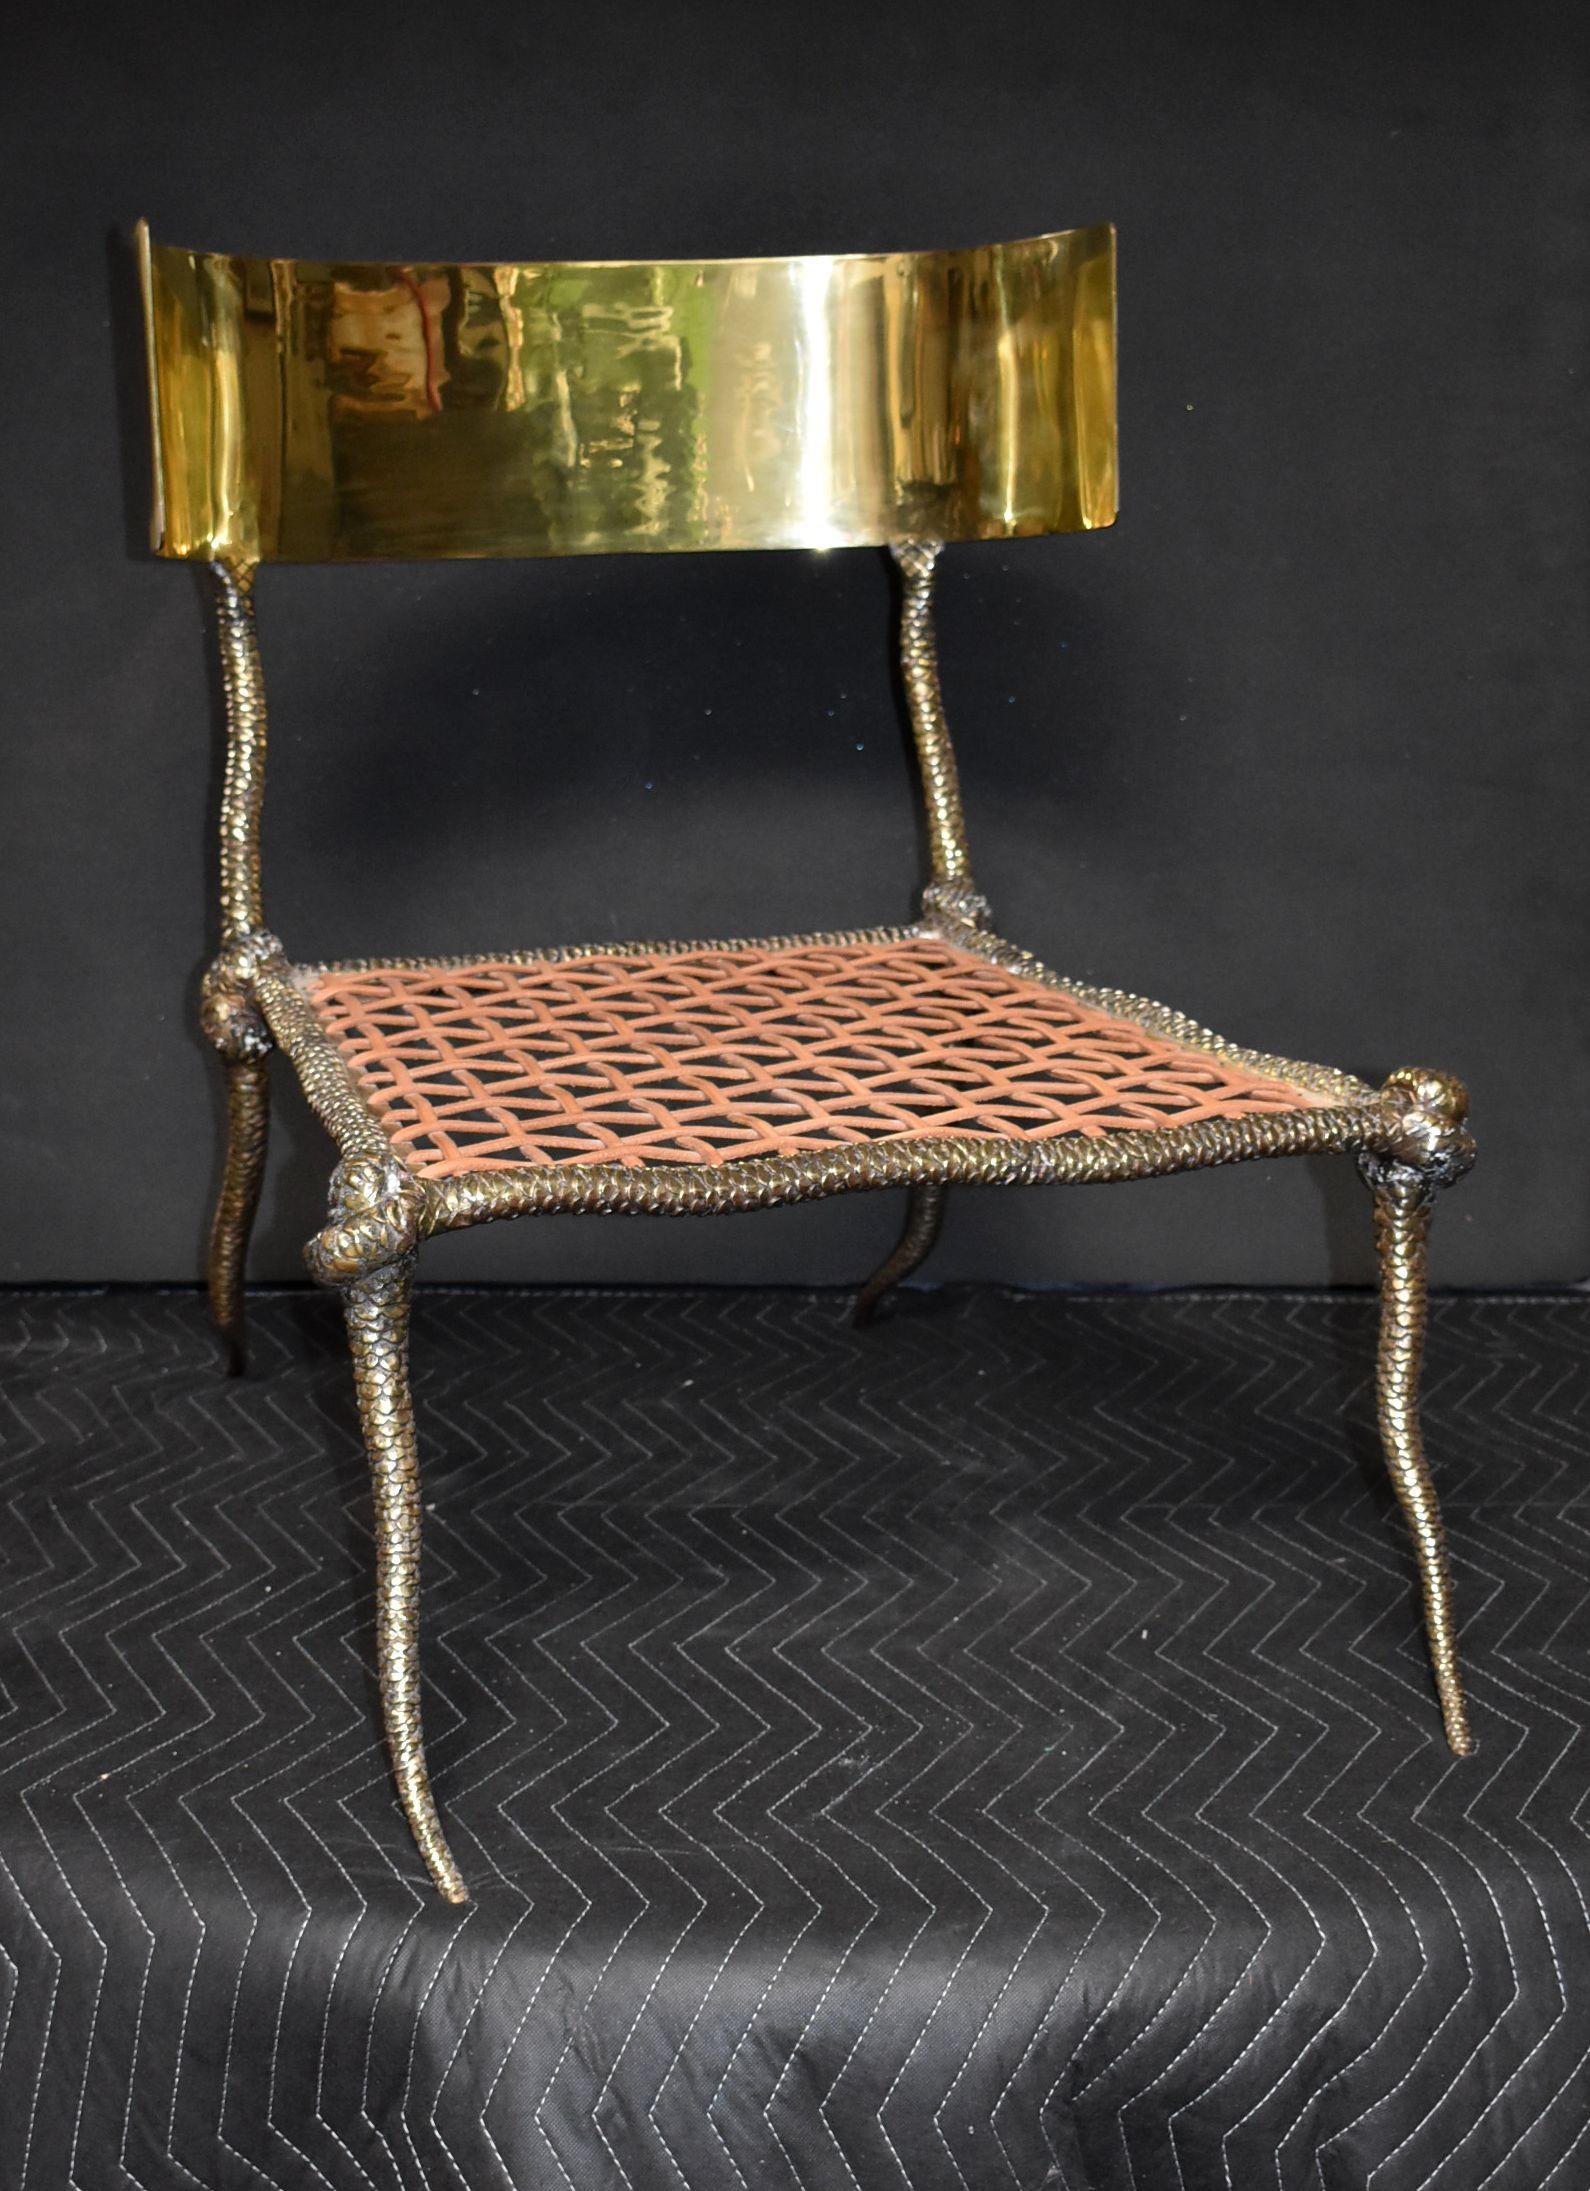 Solid brass sculptural side chair with leather strapping and curve back. 

Additional Dimensions:
Width of curve back 22.50 inches
Width front seat 24 inches
Width back seat 20.50 inches
Depth from front to back legs 31 inches
Height seat without